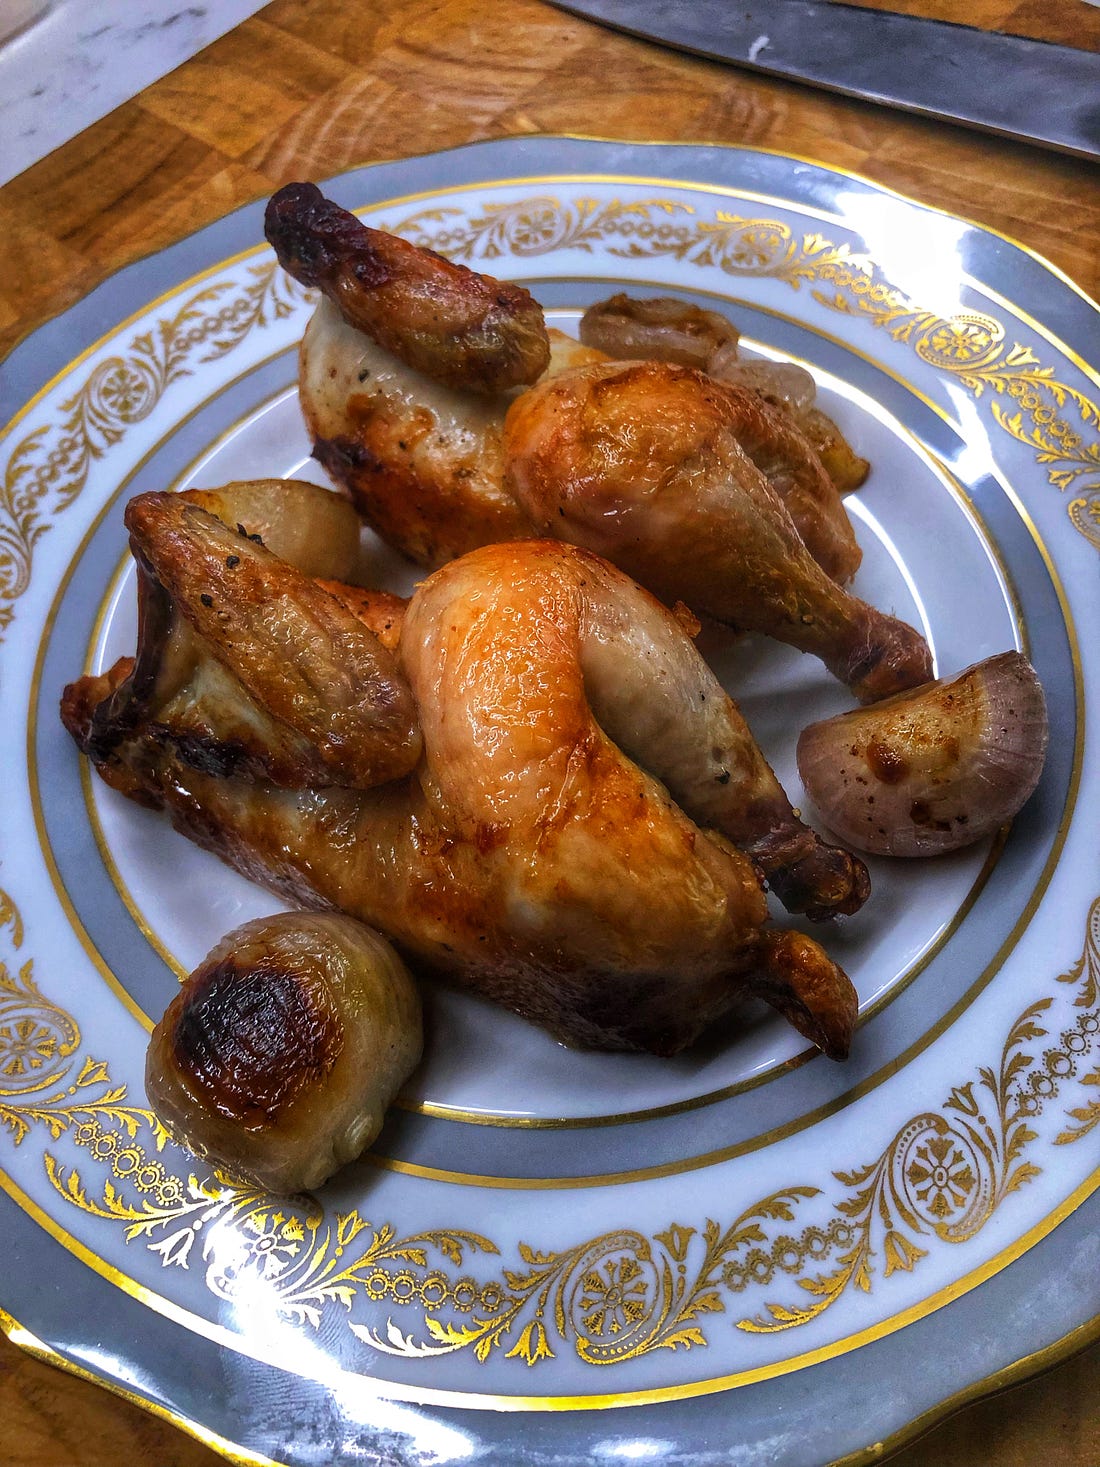 A fancy dinner plate holding two halves of a browned, roasted Cornish hen and roasted shallots.